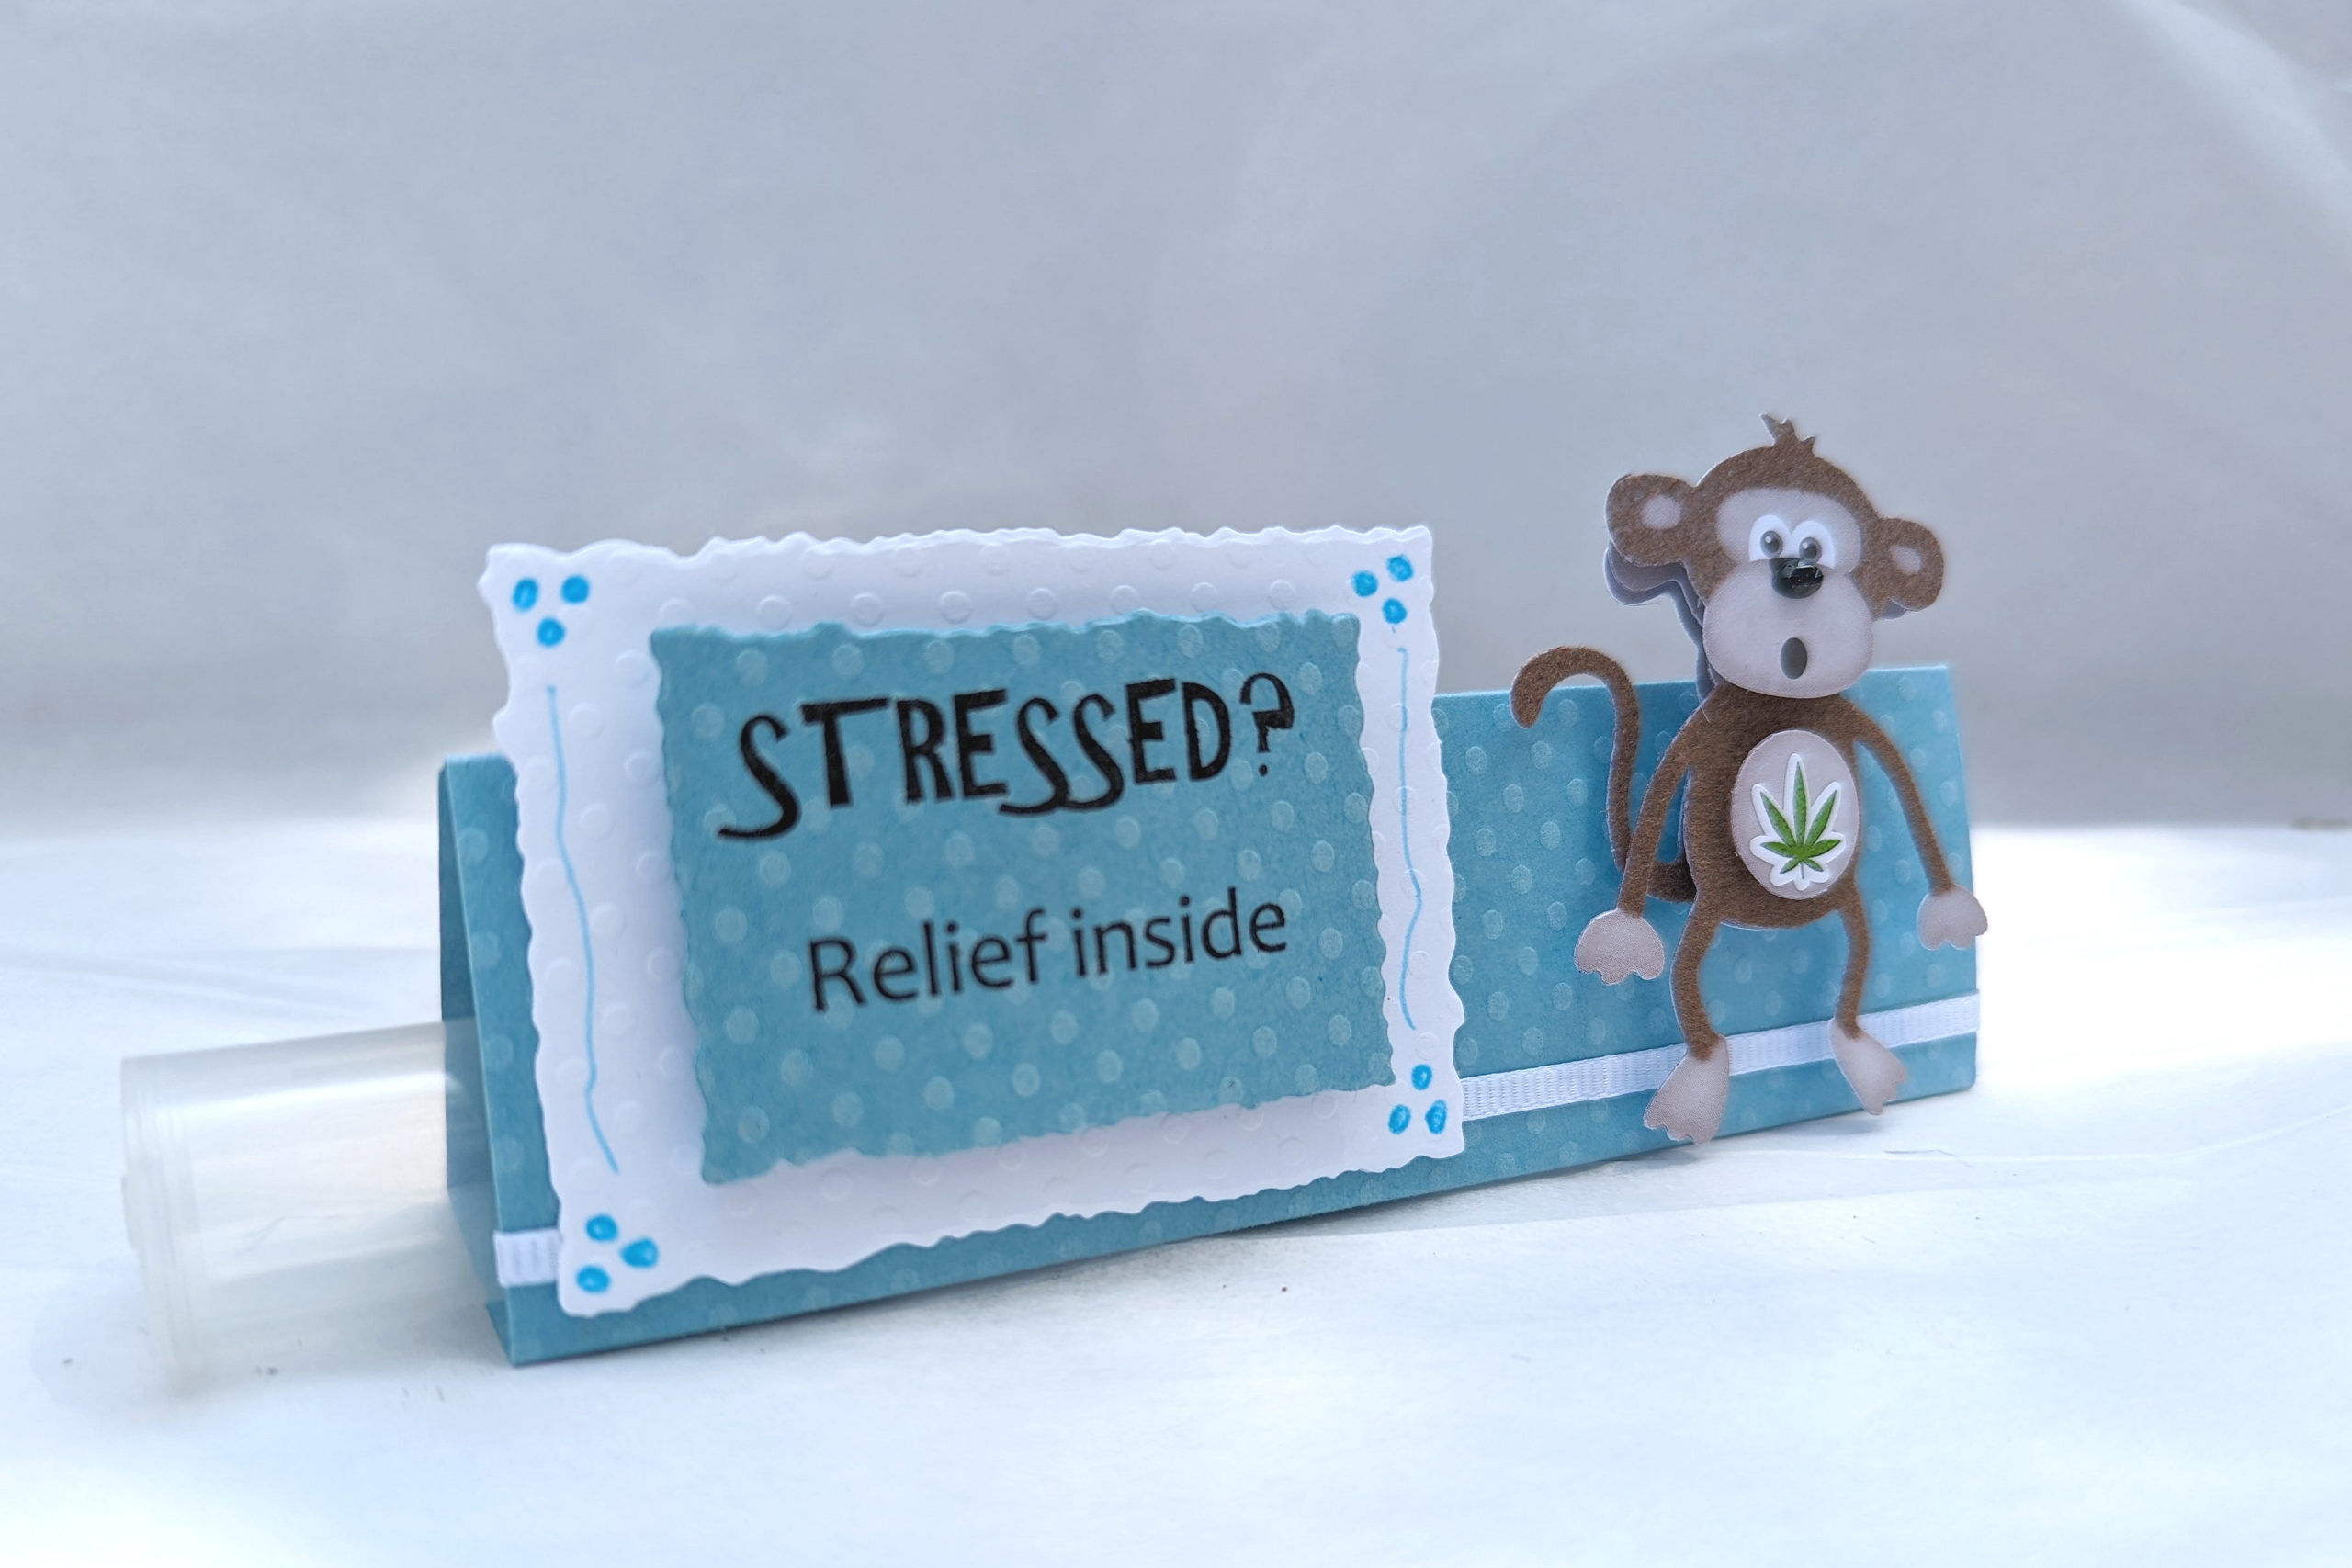 Stressed? Relief inside.